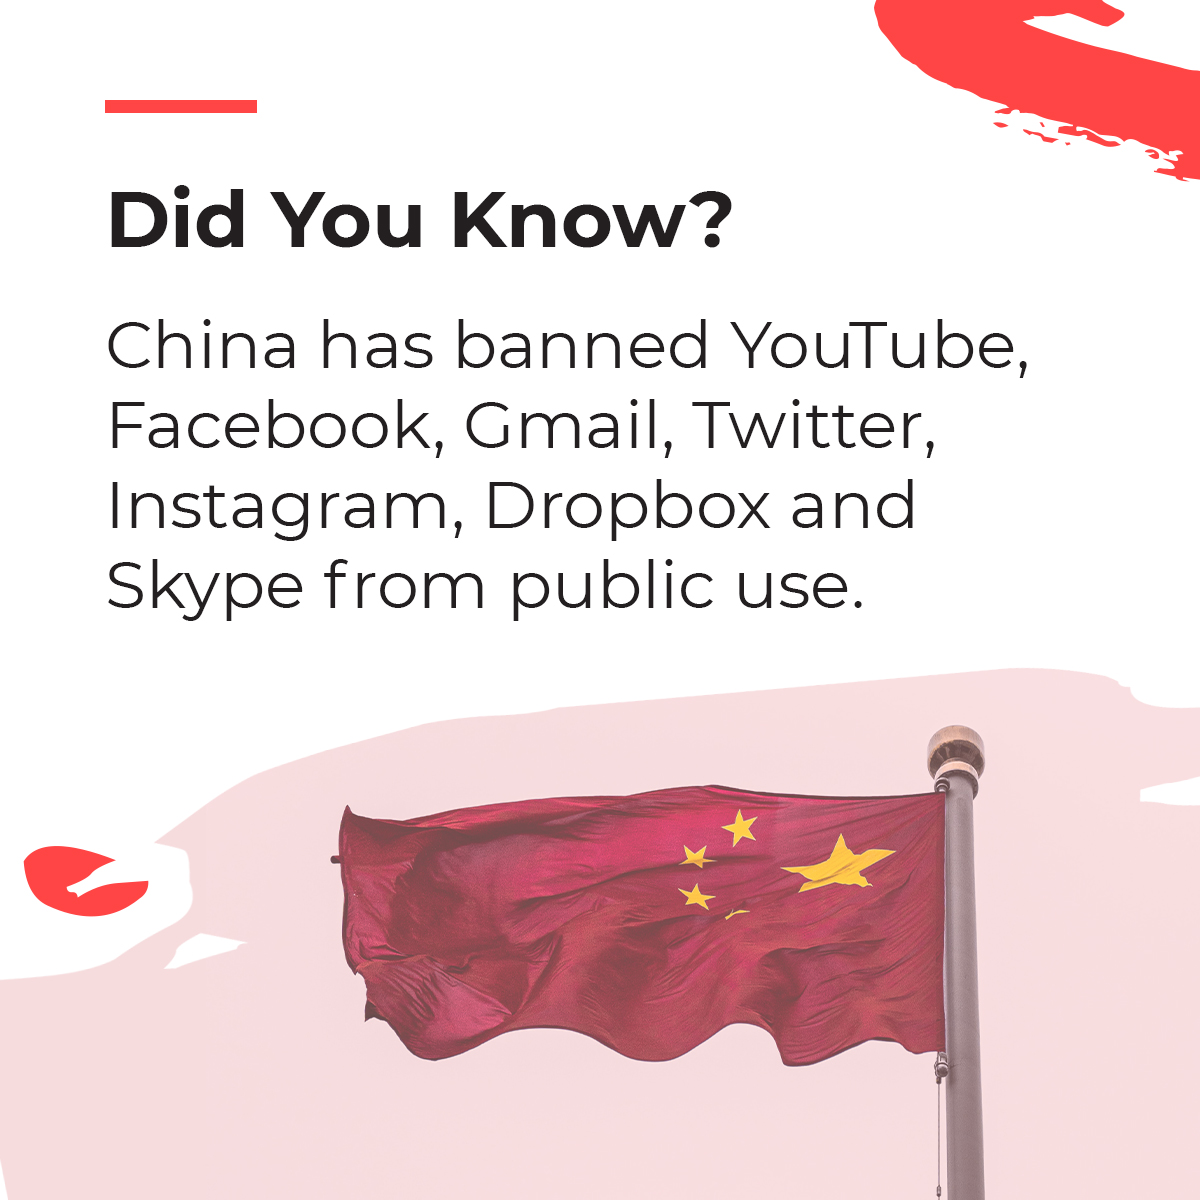 These bans are intended to control the flow of information and prevent the spread of content that the Chinese government considers to be inappropriate or harmful.

#technologyfacts #technologytrends